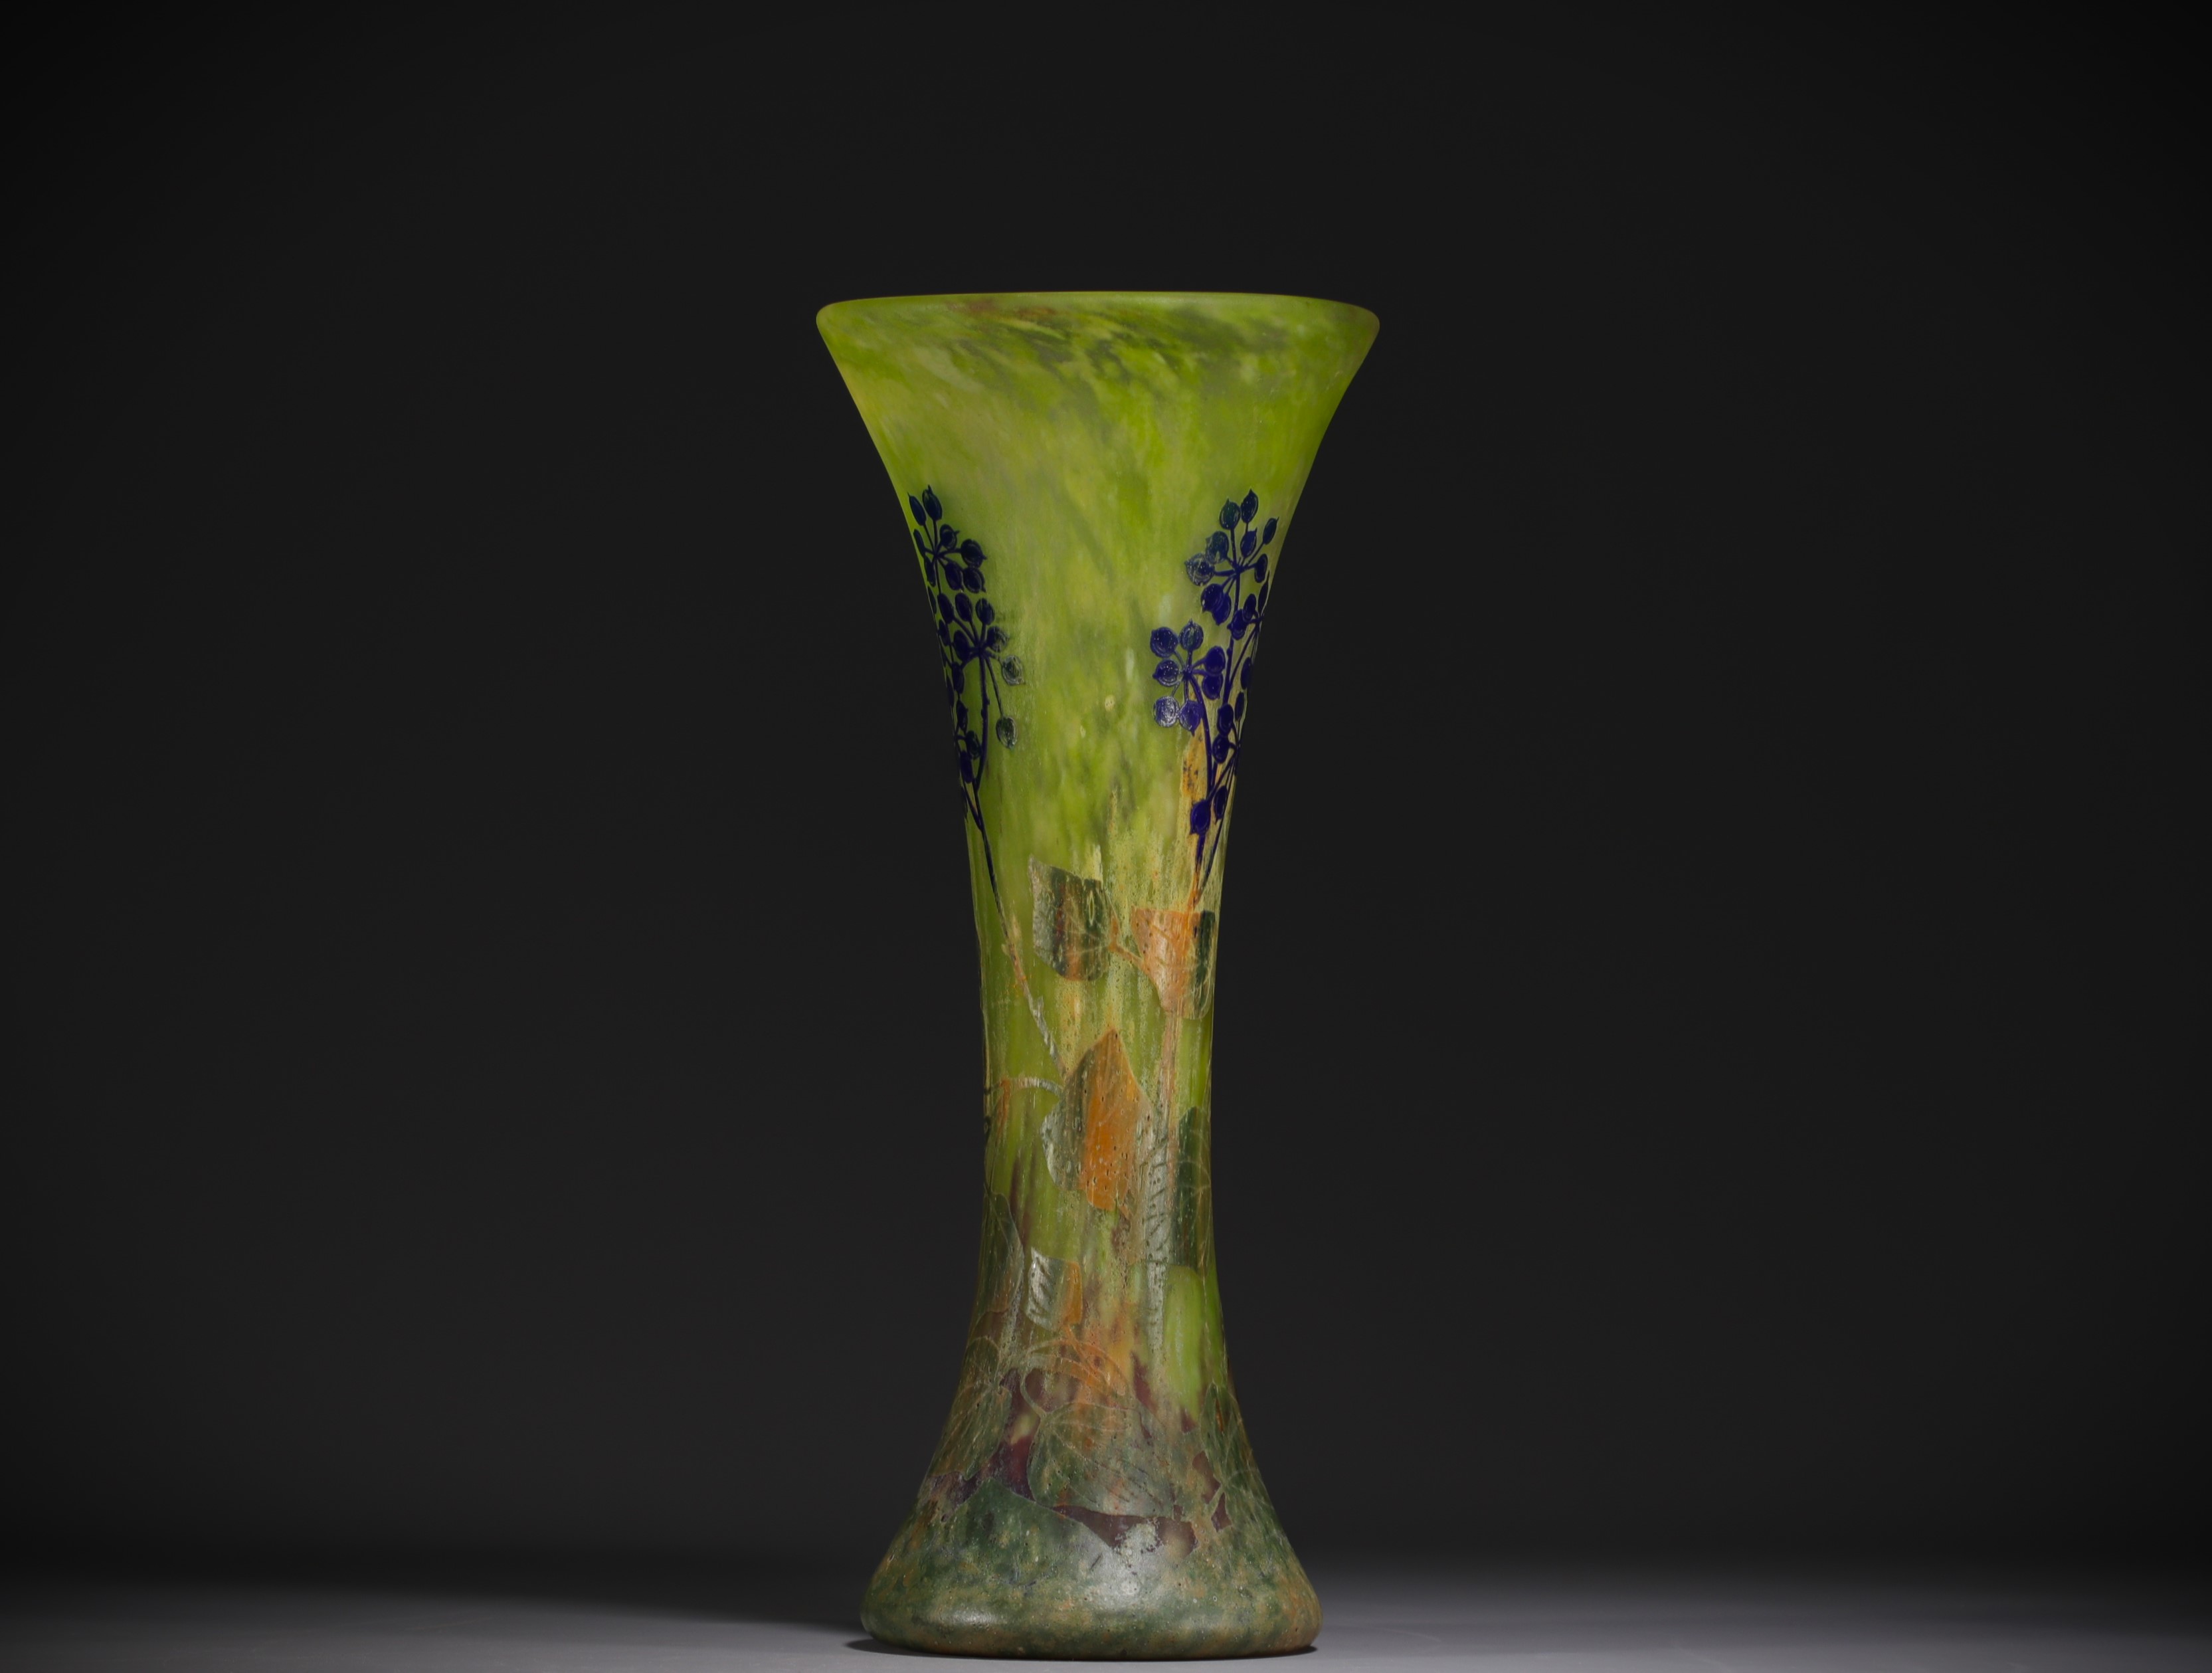 DAUM Nancy - Large multi-layered glass vase with acid-etched decoration of berries on a green marmor - Image 2 of 3